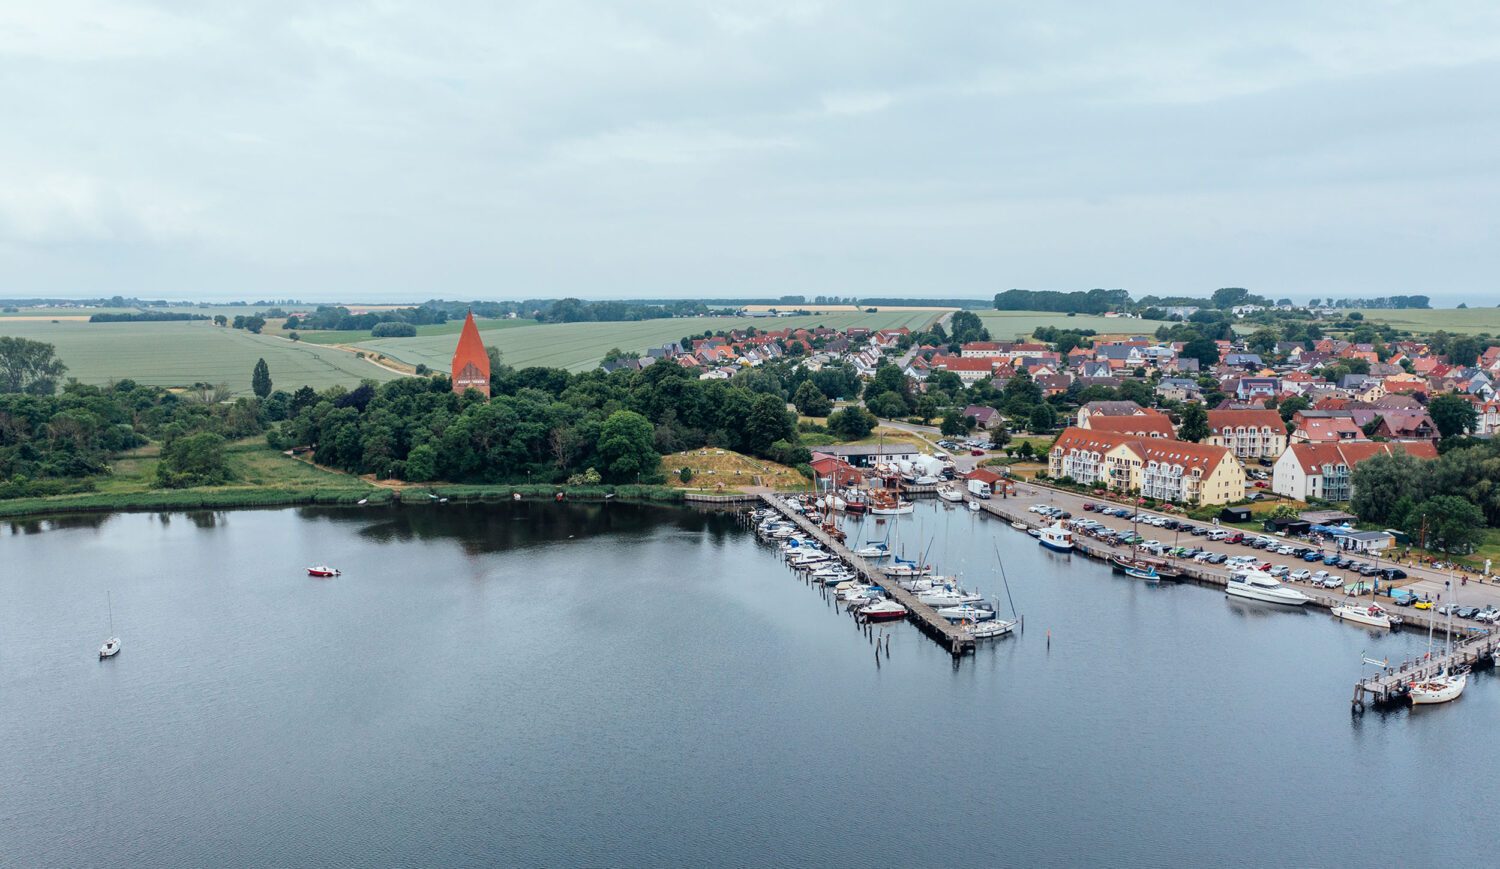 Kirchdorf is the largest village on the island of Poel. Claudia Drossert's café is located just a few minutes from the harbor